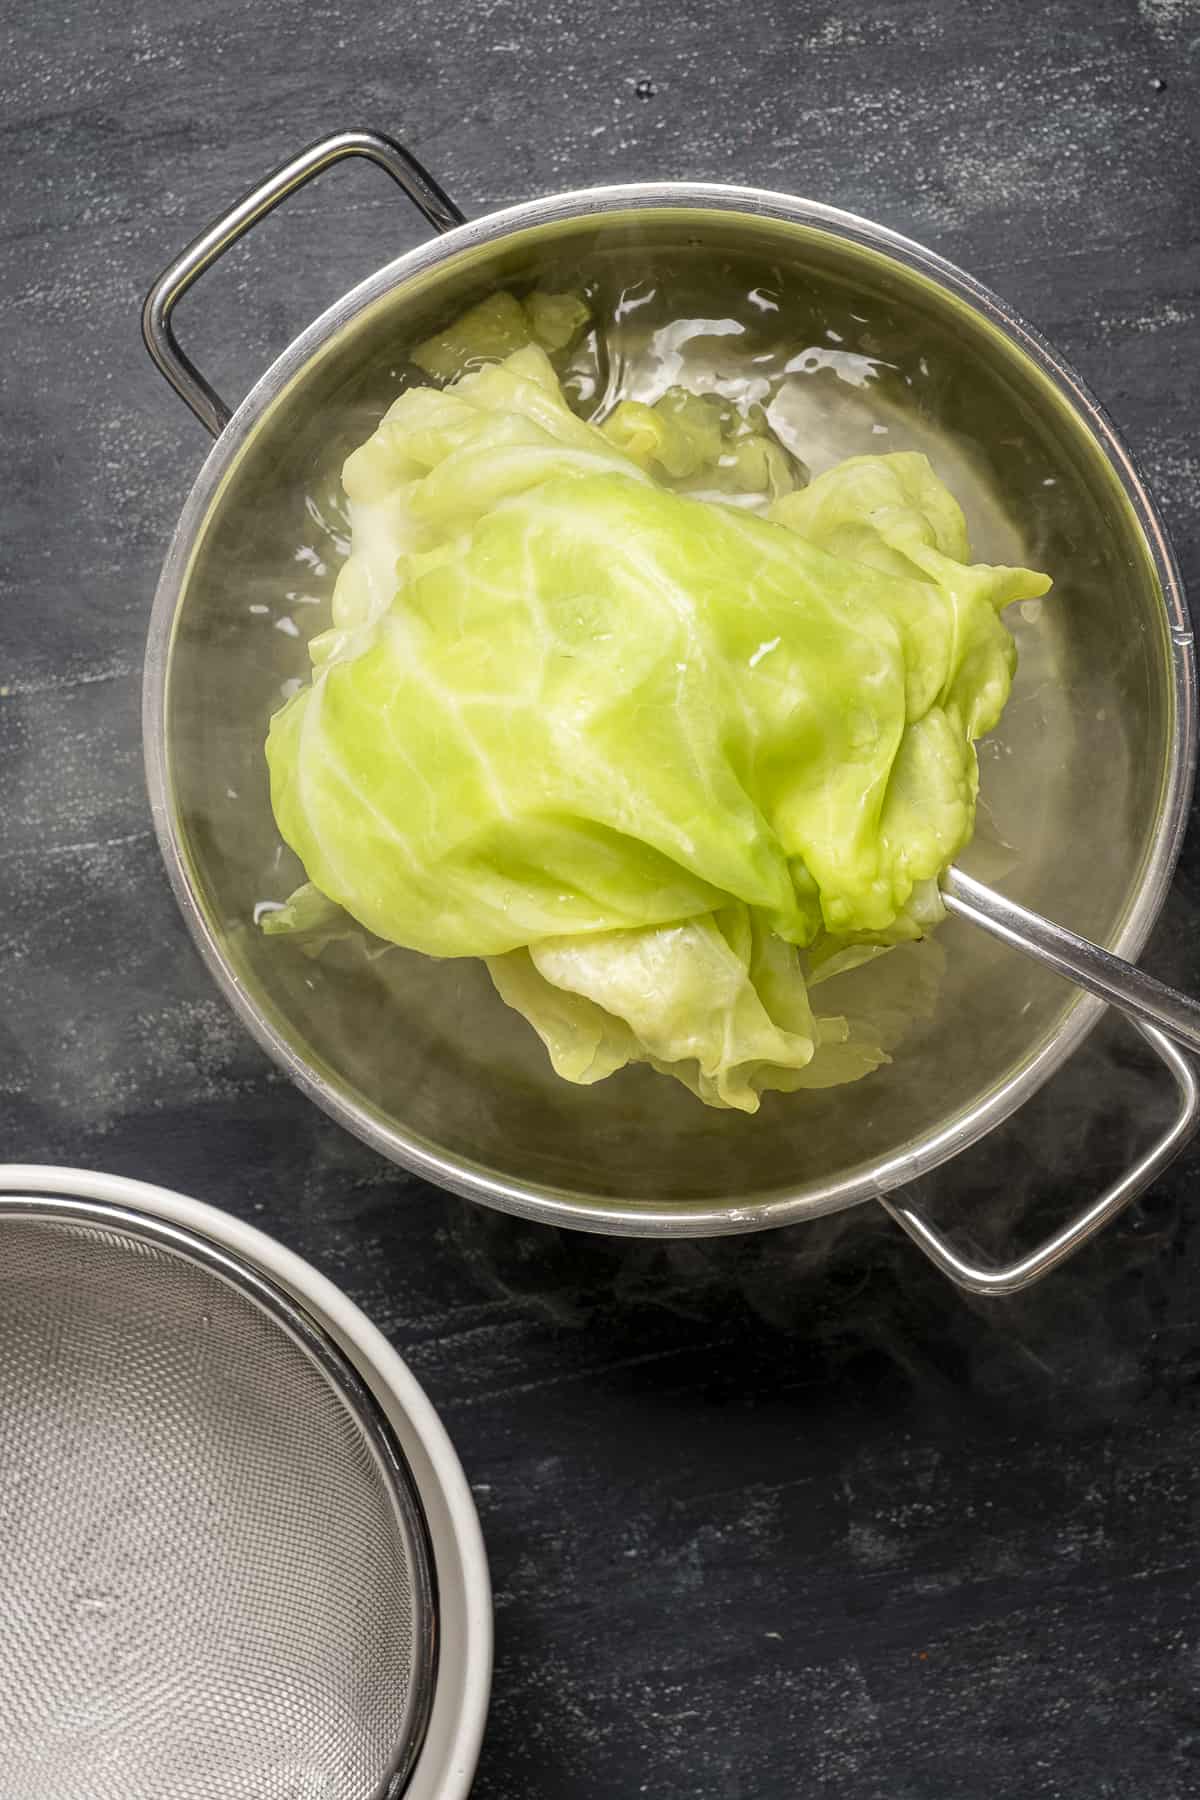 Cabbage leaves blanching in boiling water in a pot and a strainer on the side.